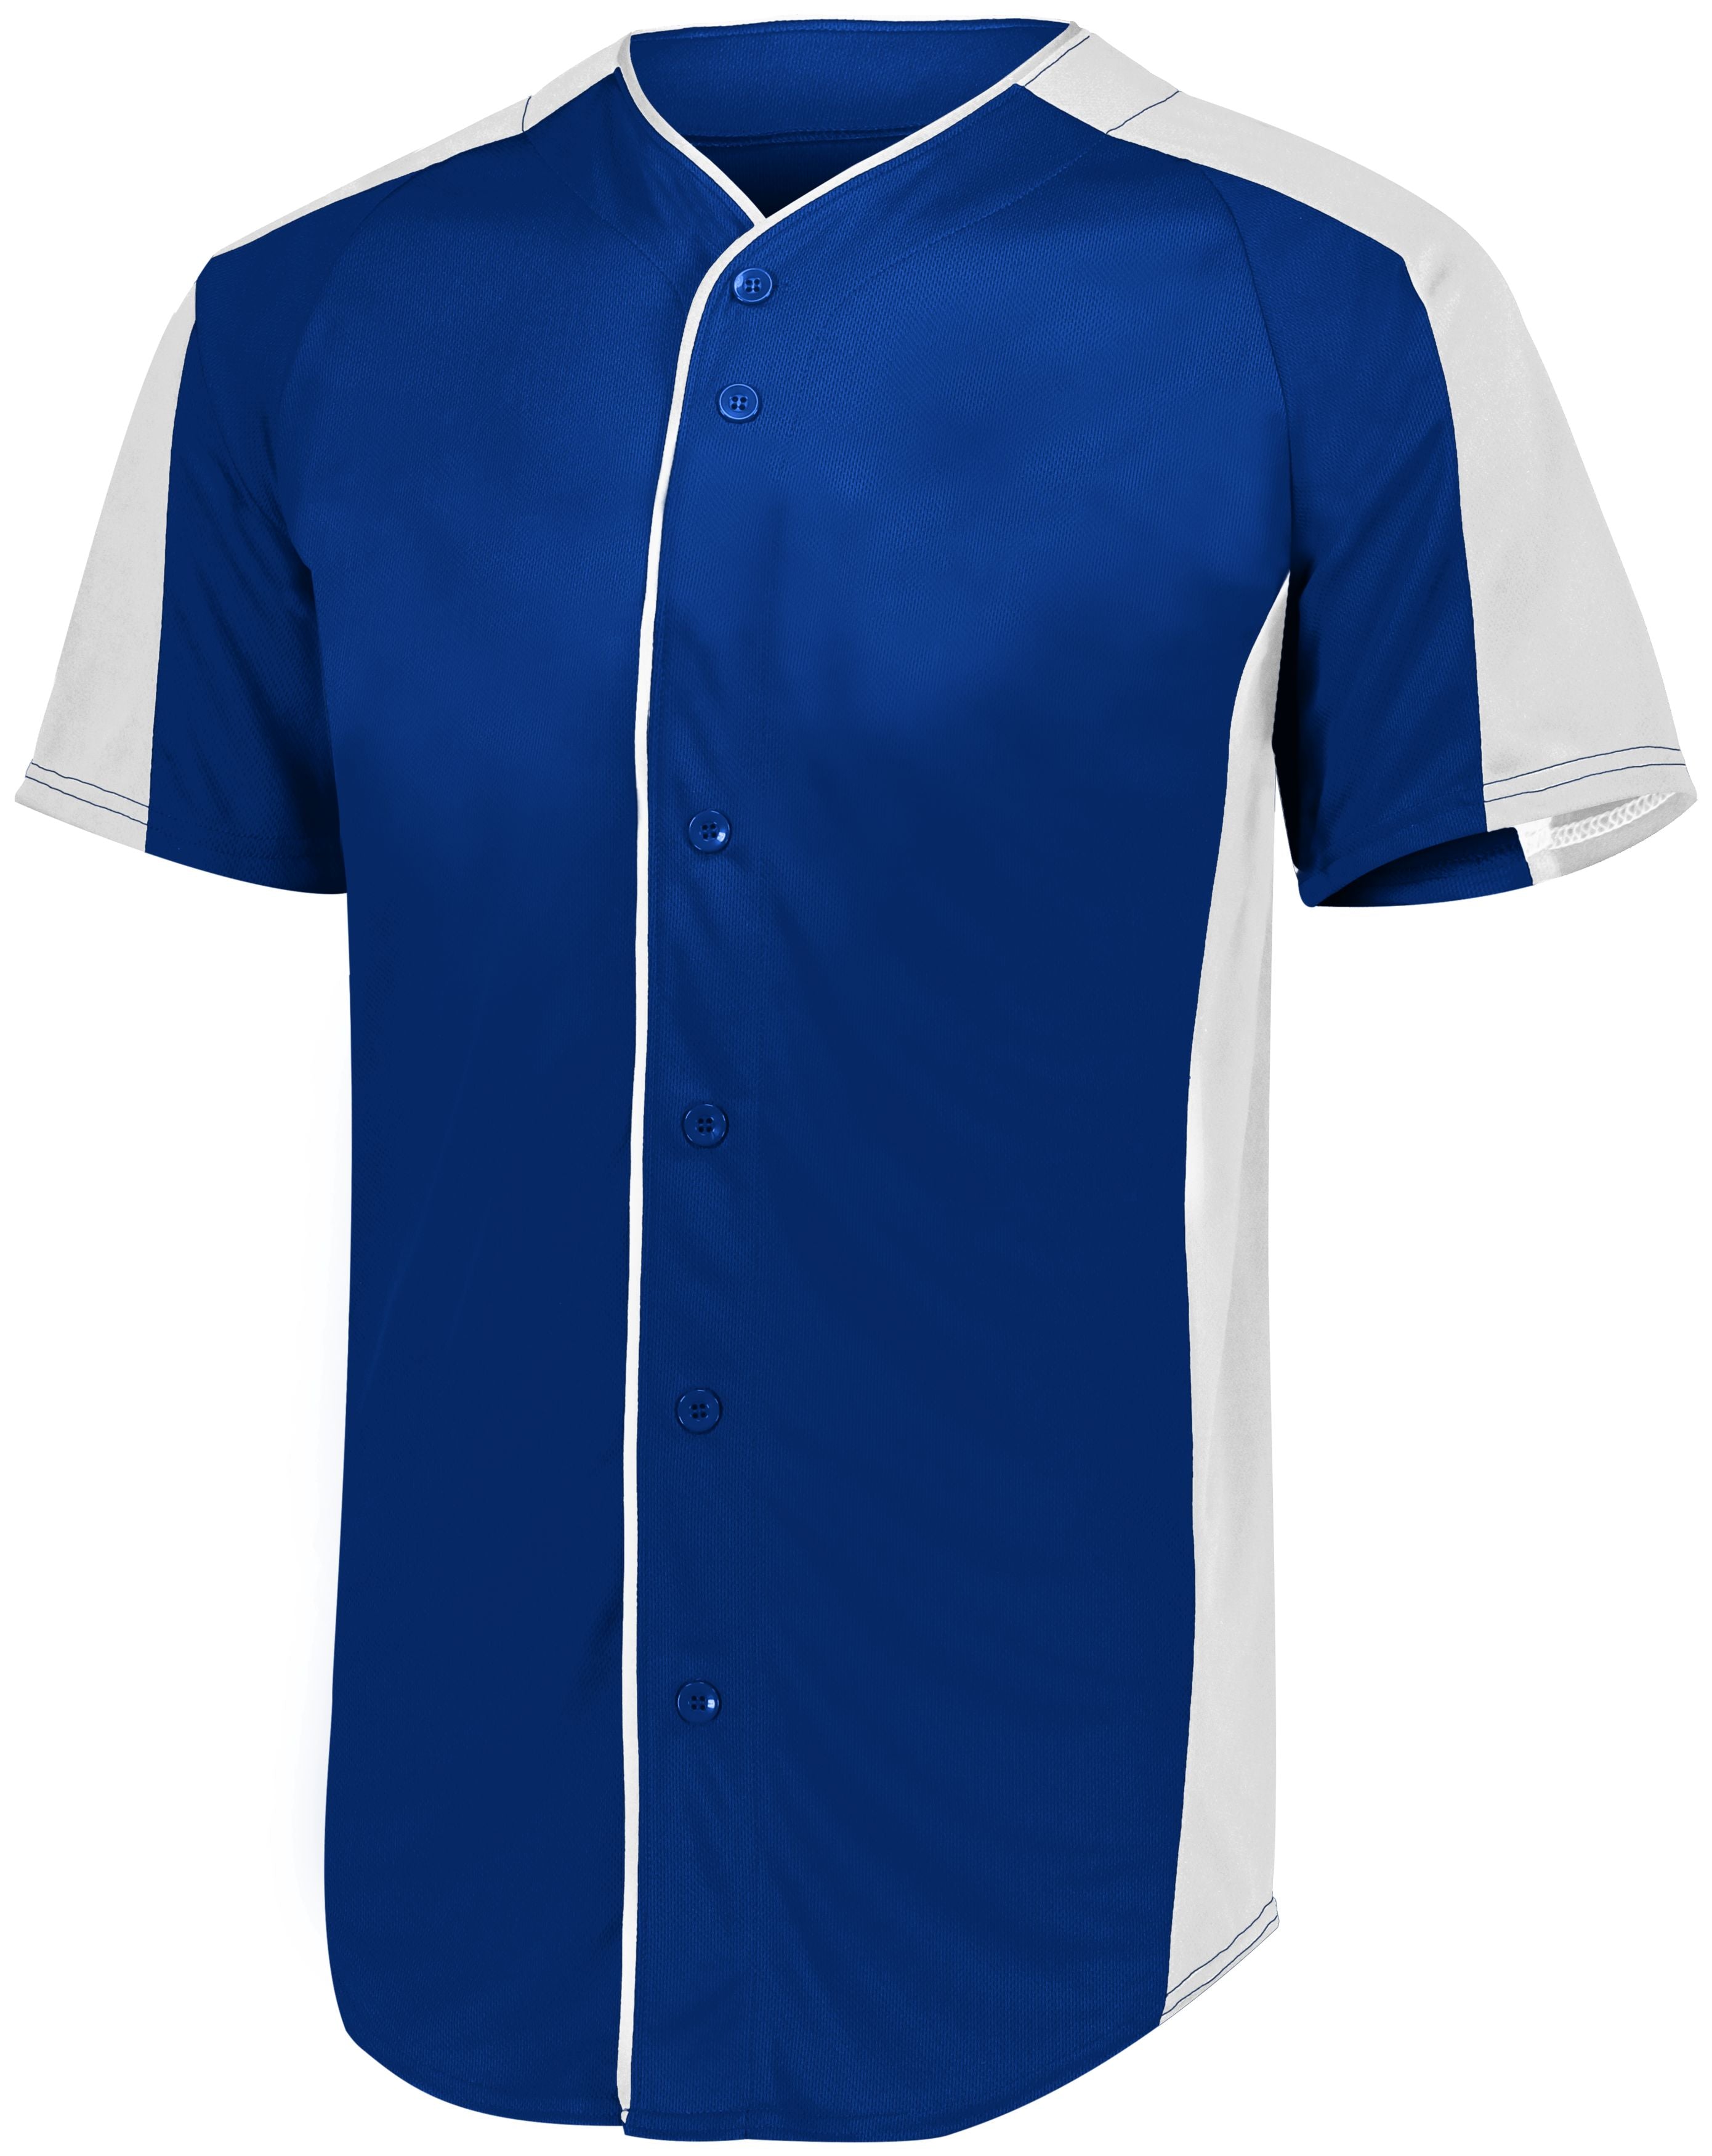 Augusta Sportswear Full-Button Baseball Jersey in Navy/White  -Part of the Adult, Adult-Jersey, Augusta-Products, Baseball, Shirts, All-Sports, All-Sports-1 product lines at KanaleyCreations.com